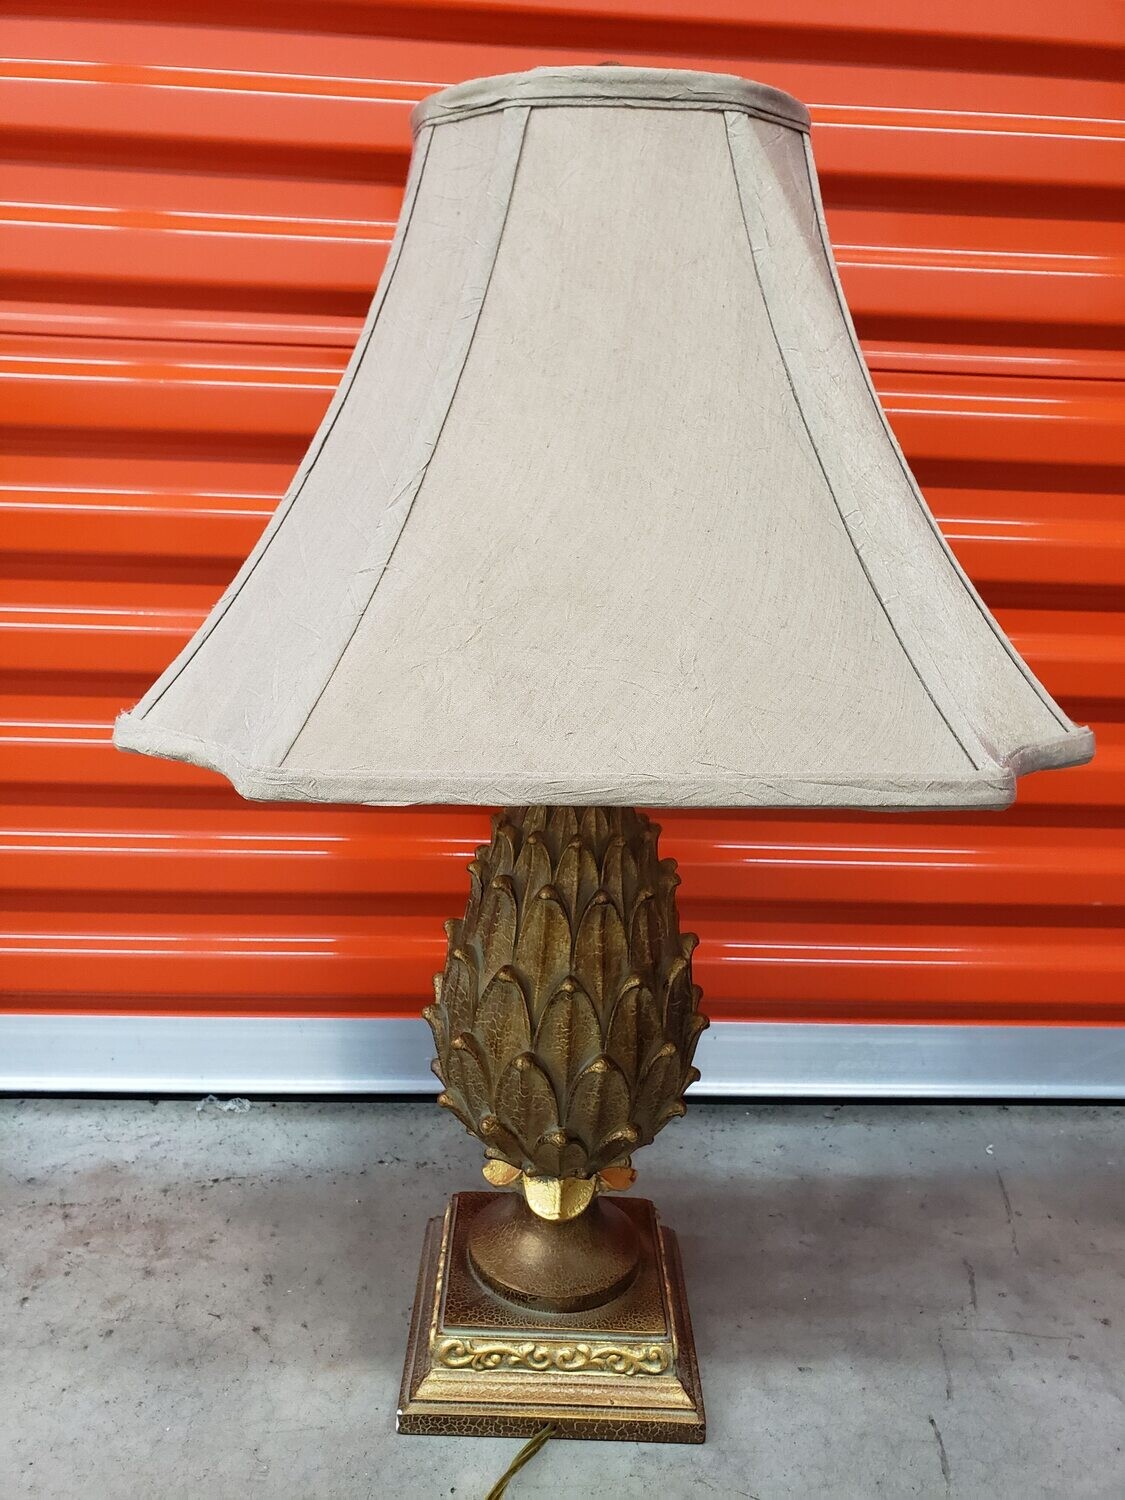 Gold Antique Look Pineapple Base Lamp #2213 ** moved to family 7/7/23